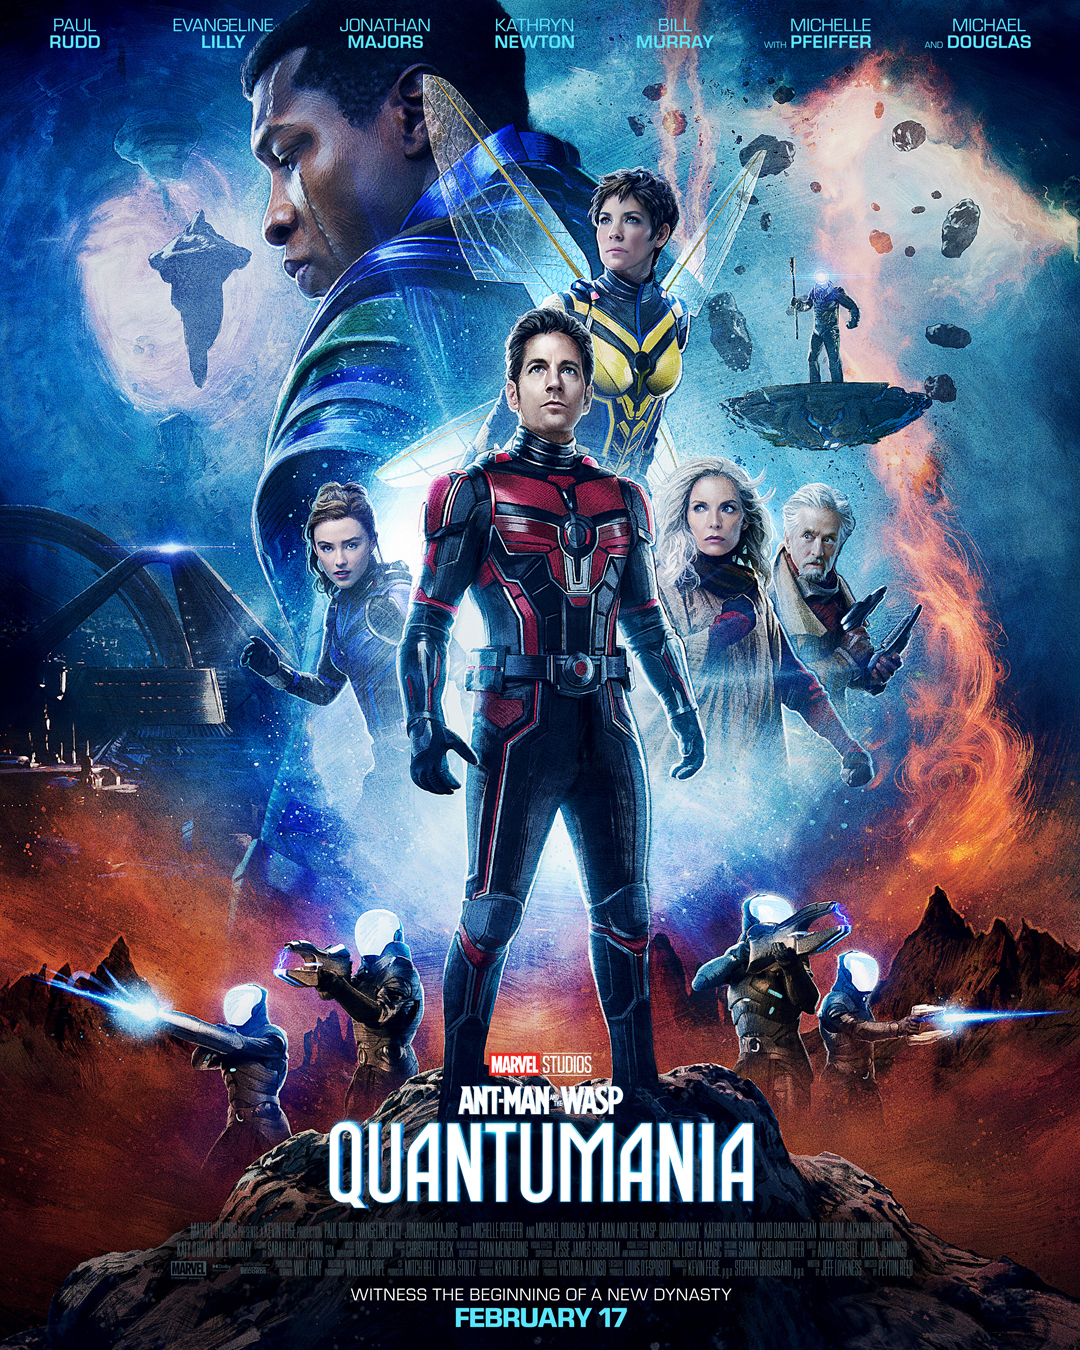 We already know the first reactions to Ant-Man and the Wasp: Quantumania